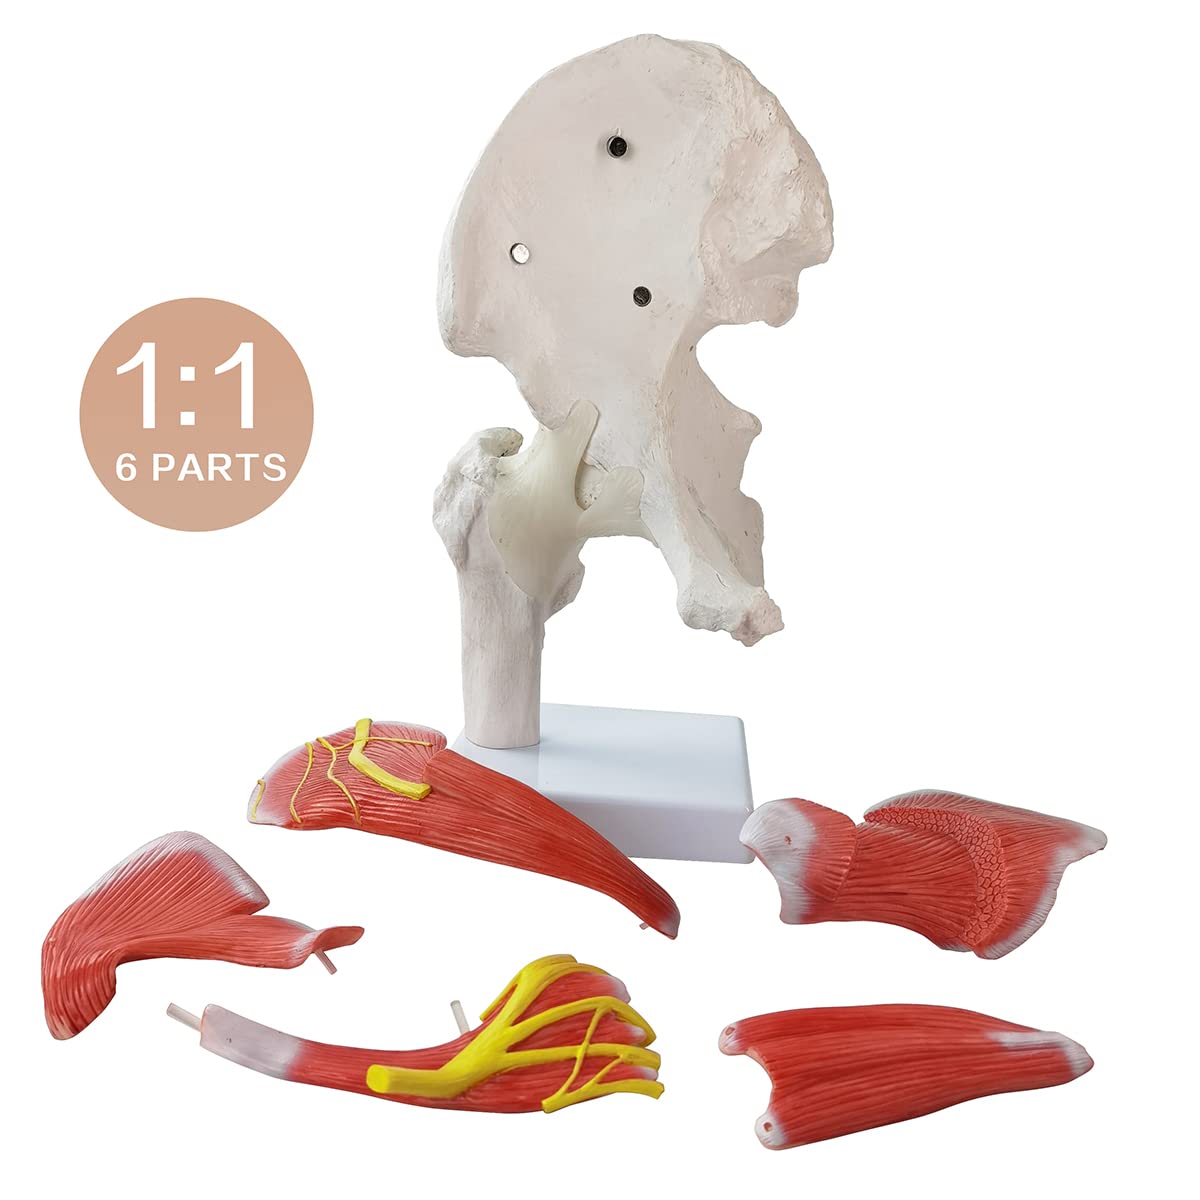 Hip-Joint-Model-with-Removable-Muscles-6-Parts-Life-Size-Human-Hip-Joint-Anatomy-Replica-of-Hip-Bone-Muscles-